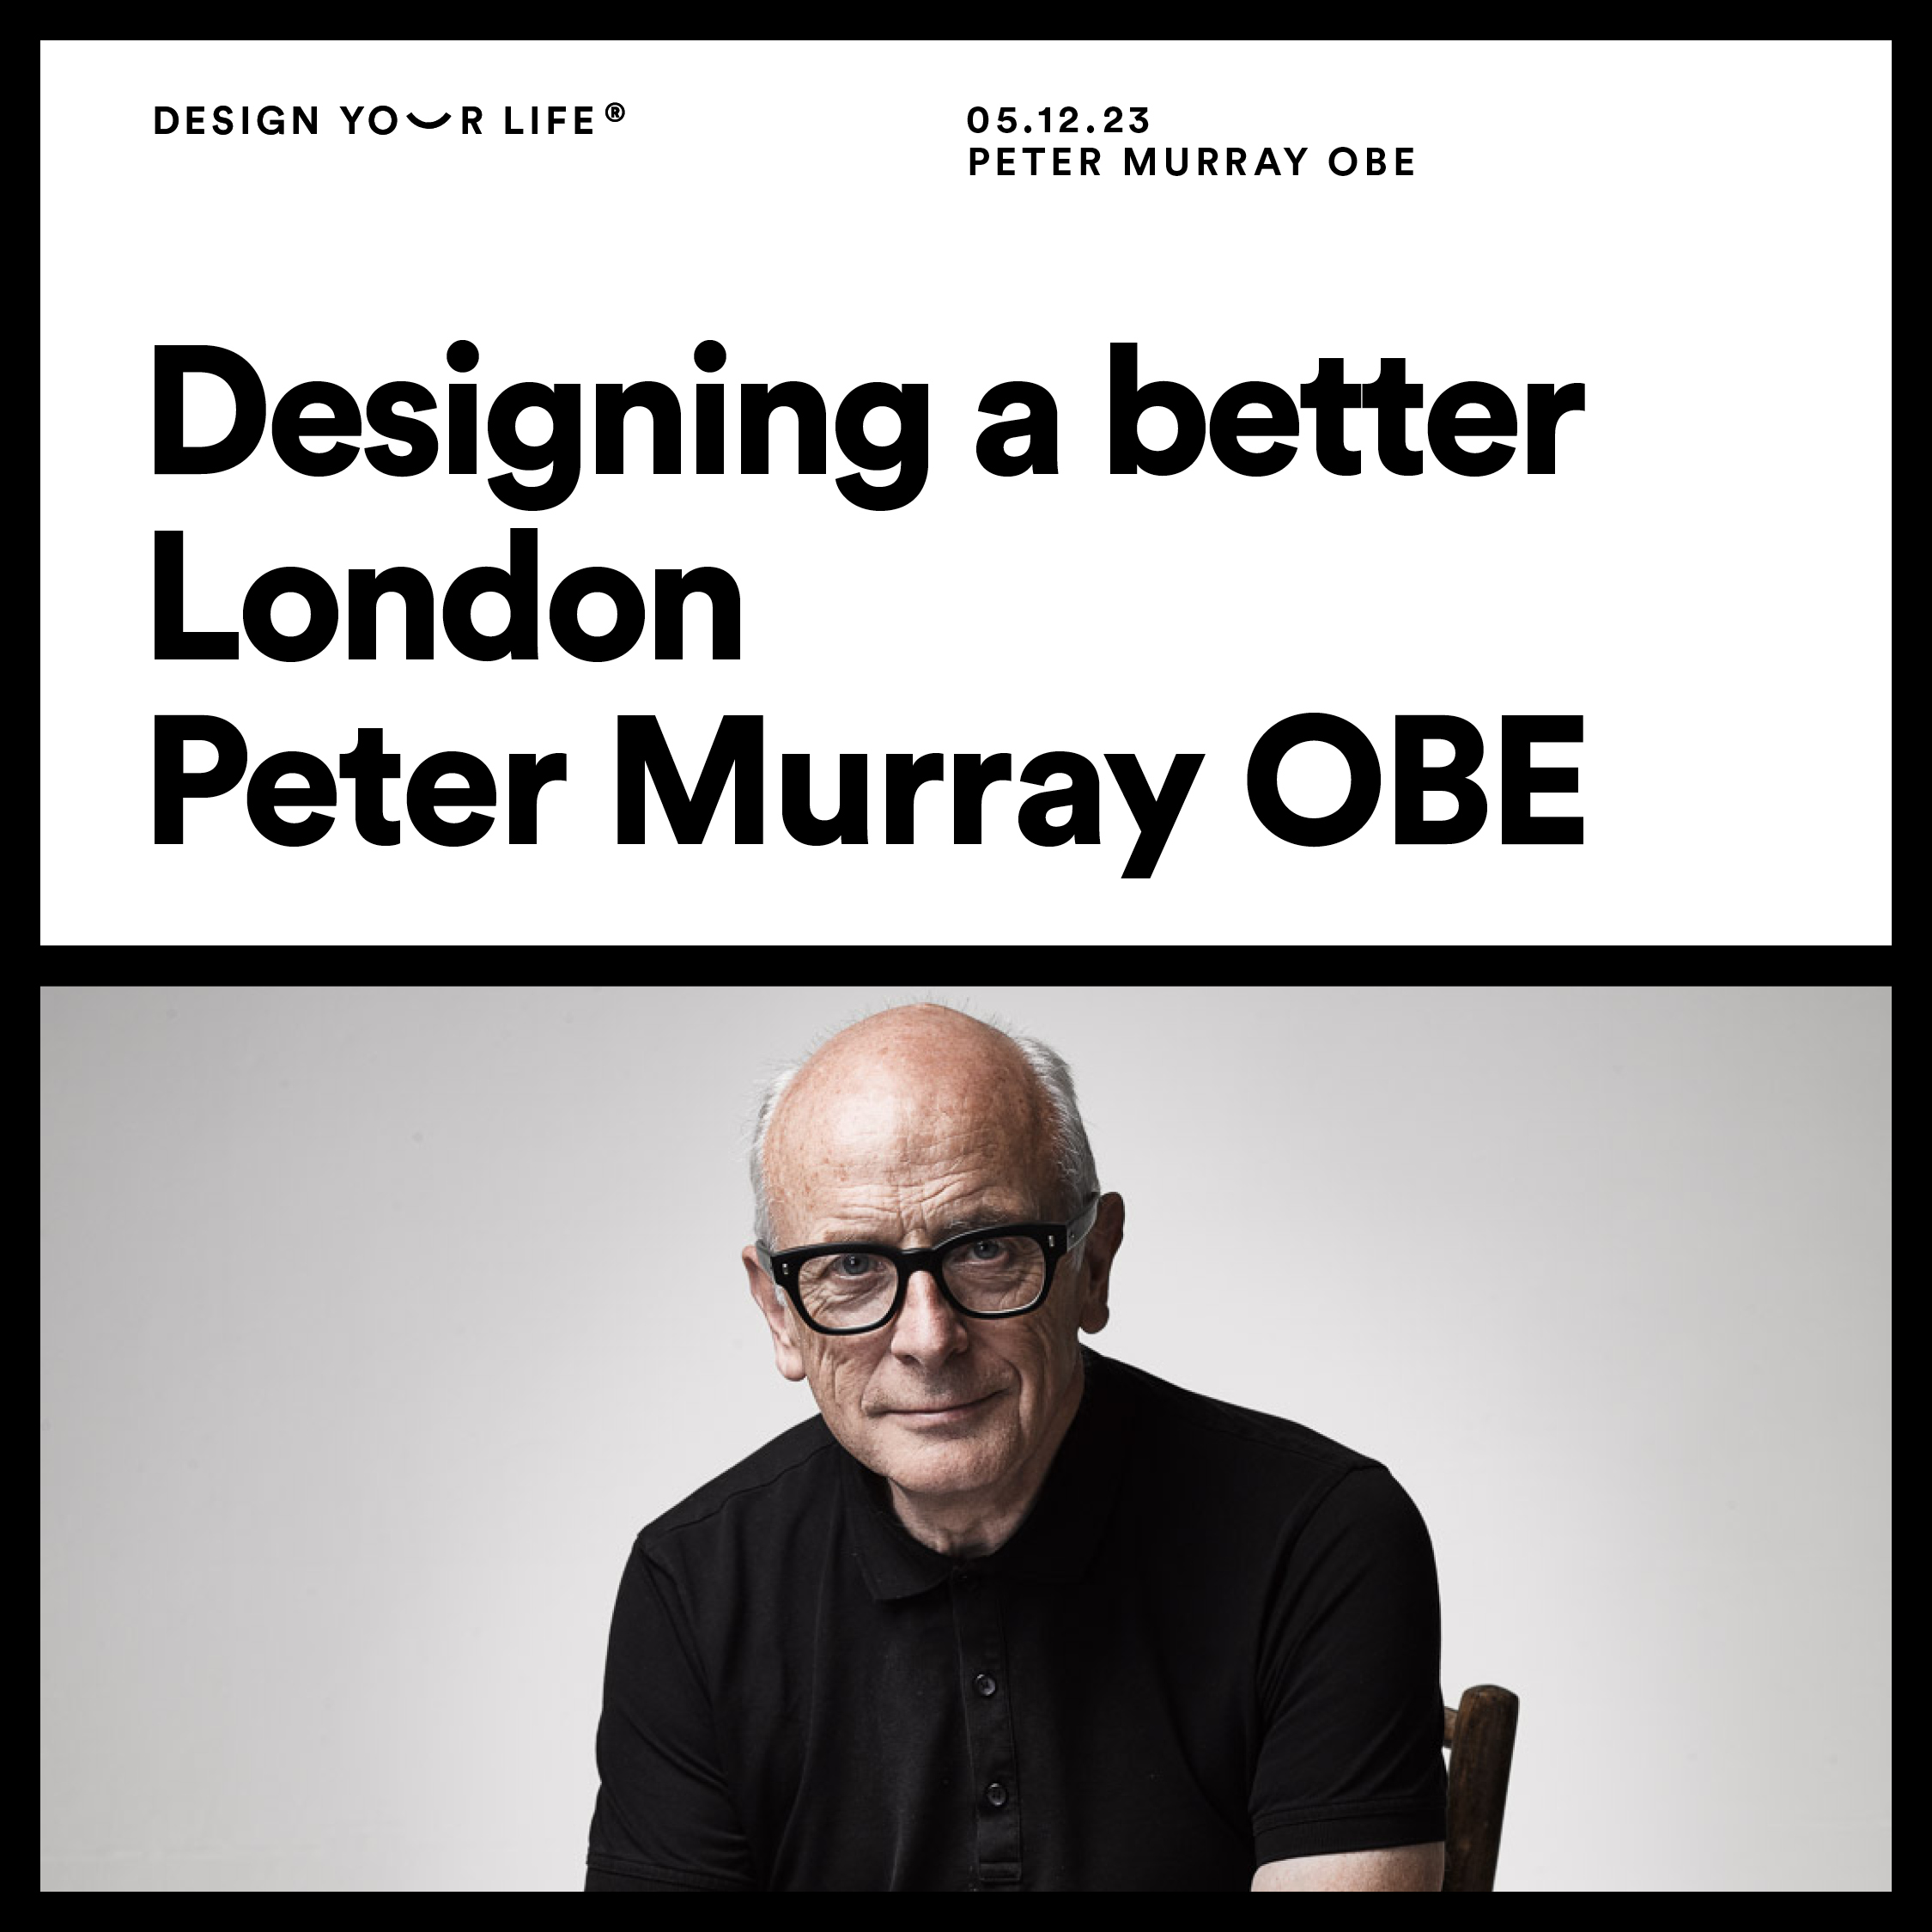 Designing a better London with Peter Murray OBE